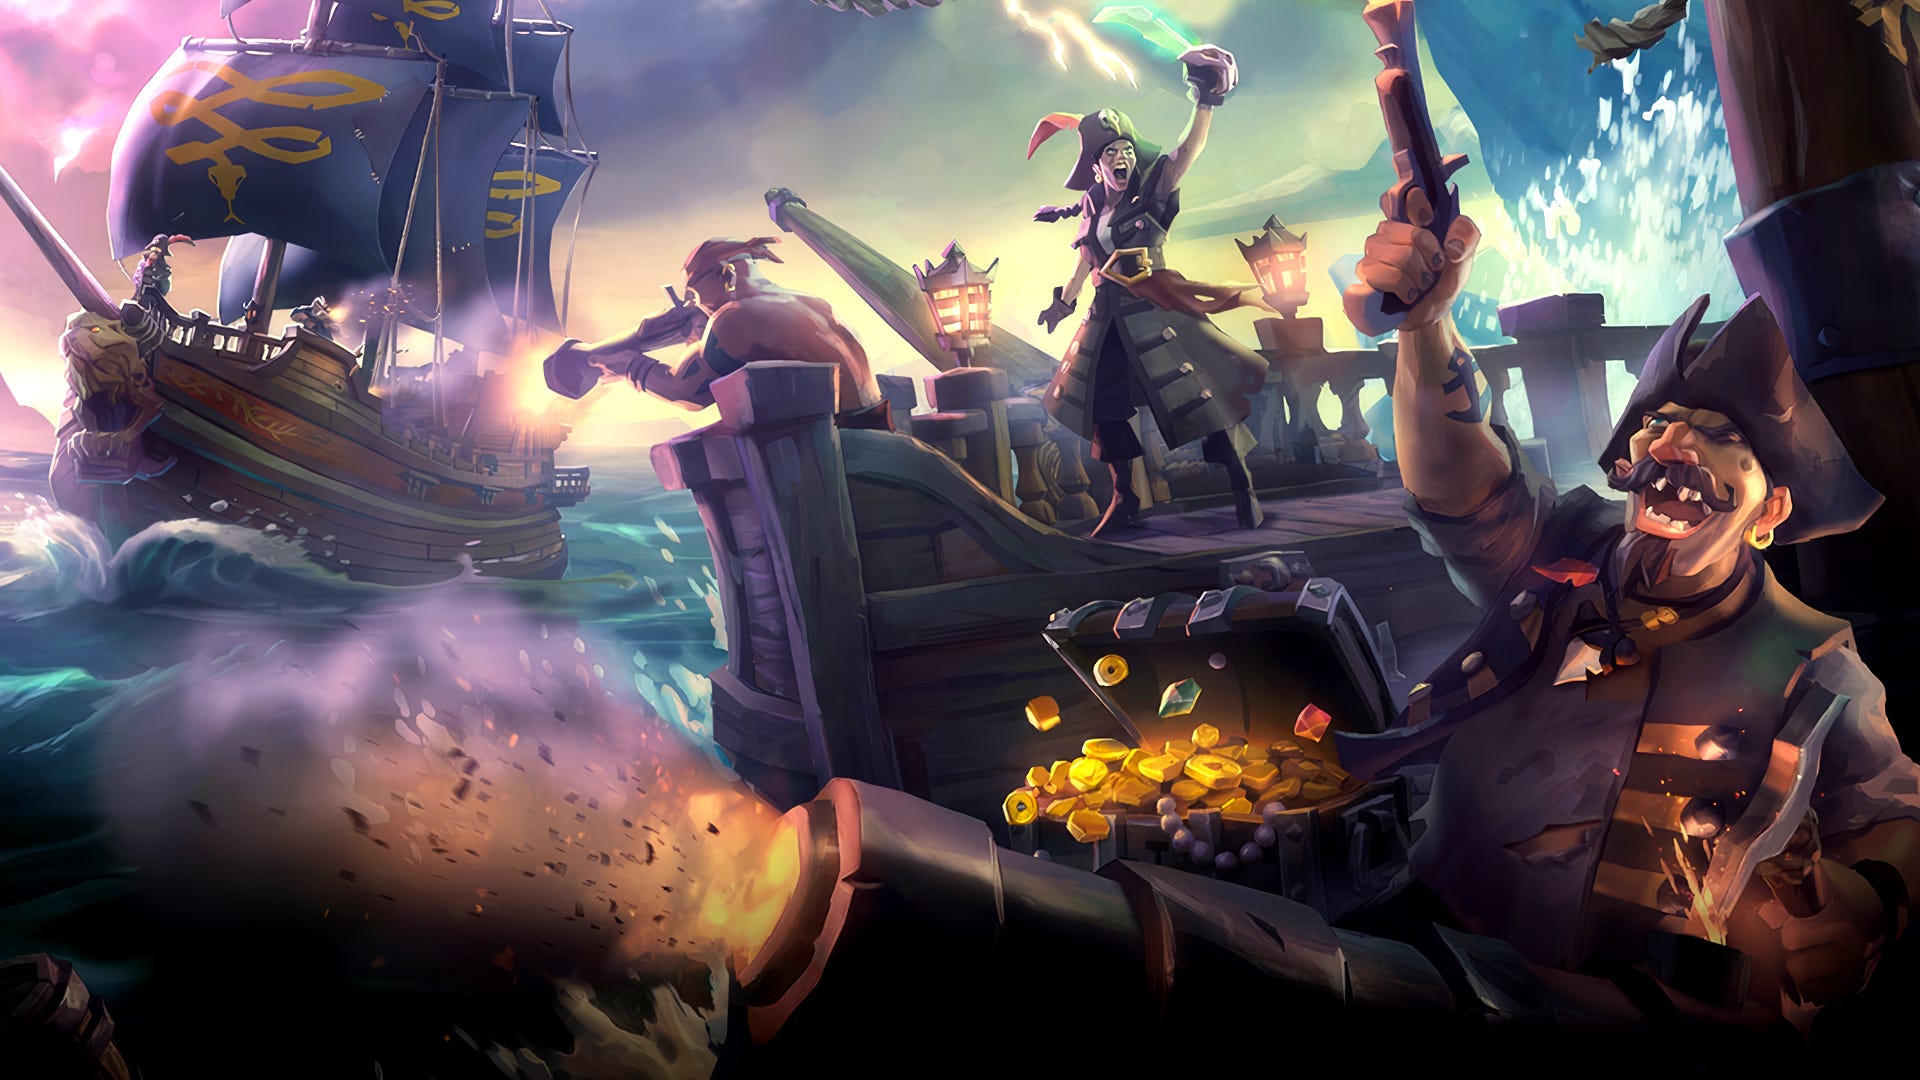 Sea of Thieves on PlayStation 5: the next big Xbox multi-platform game tested